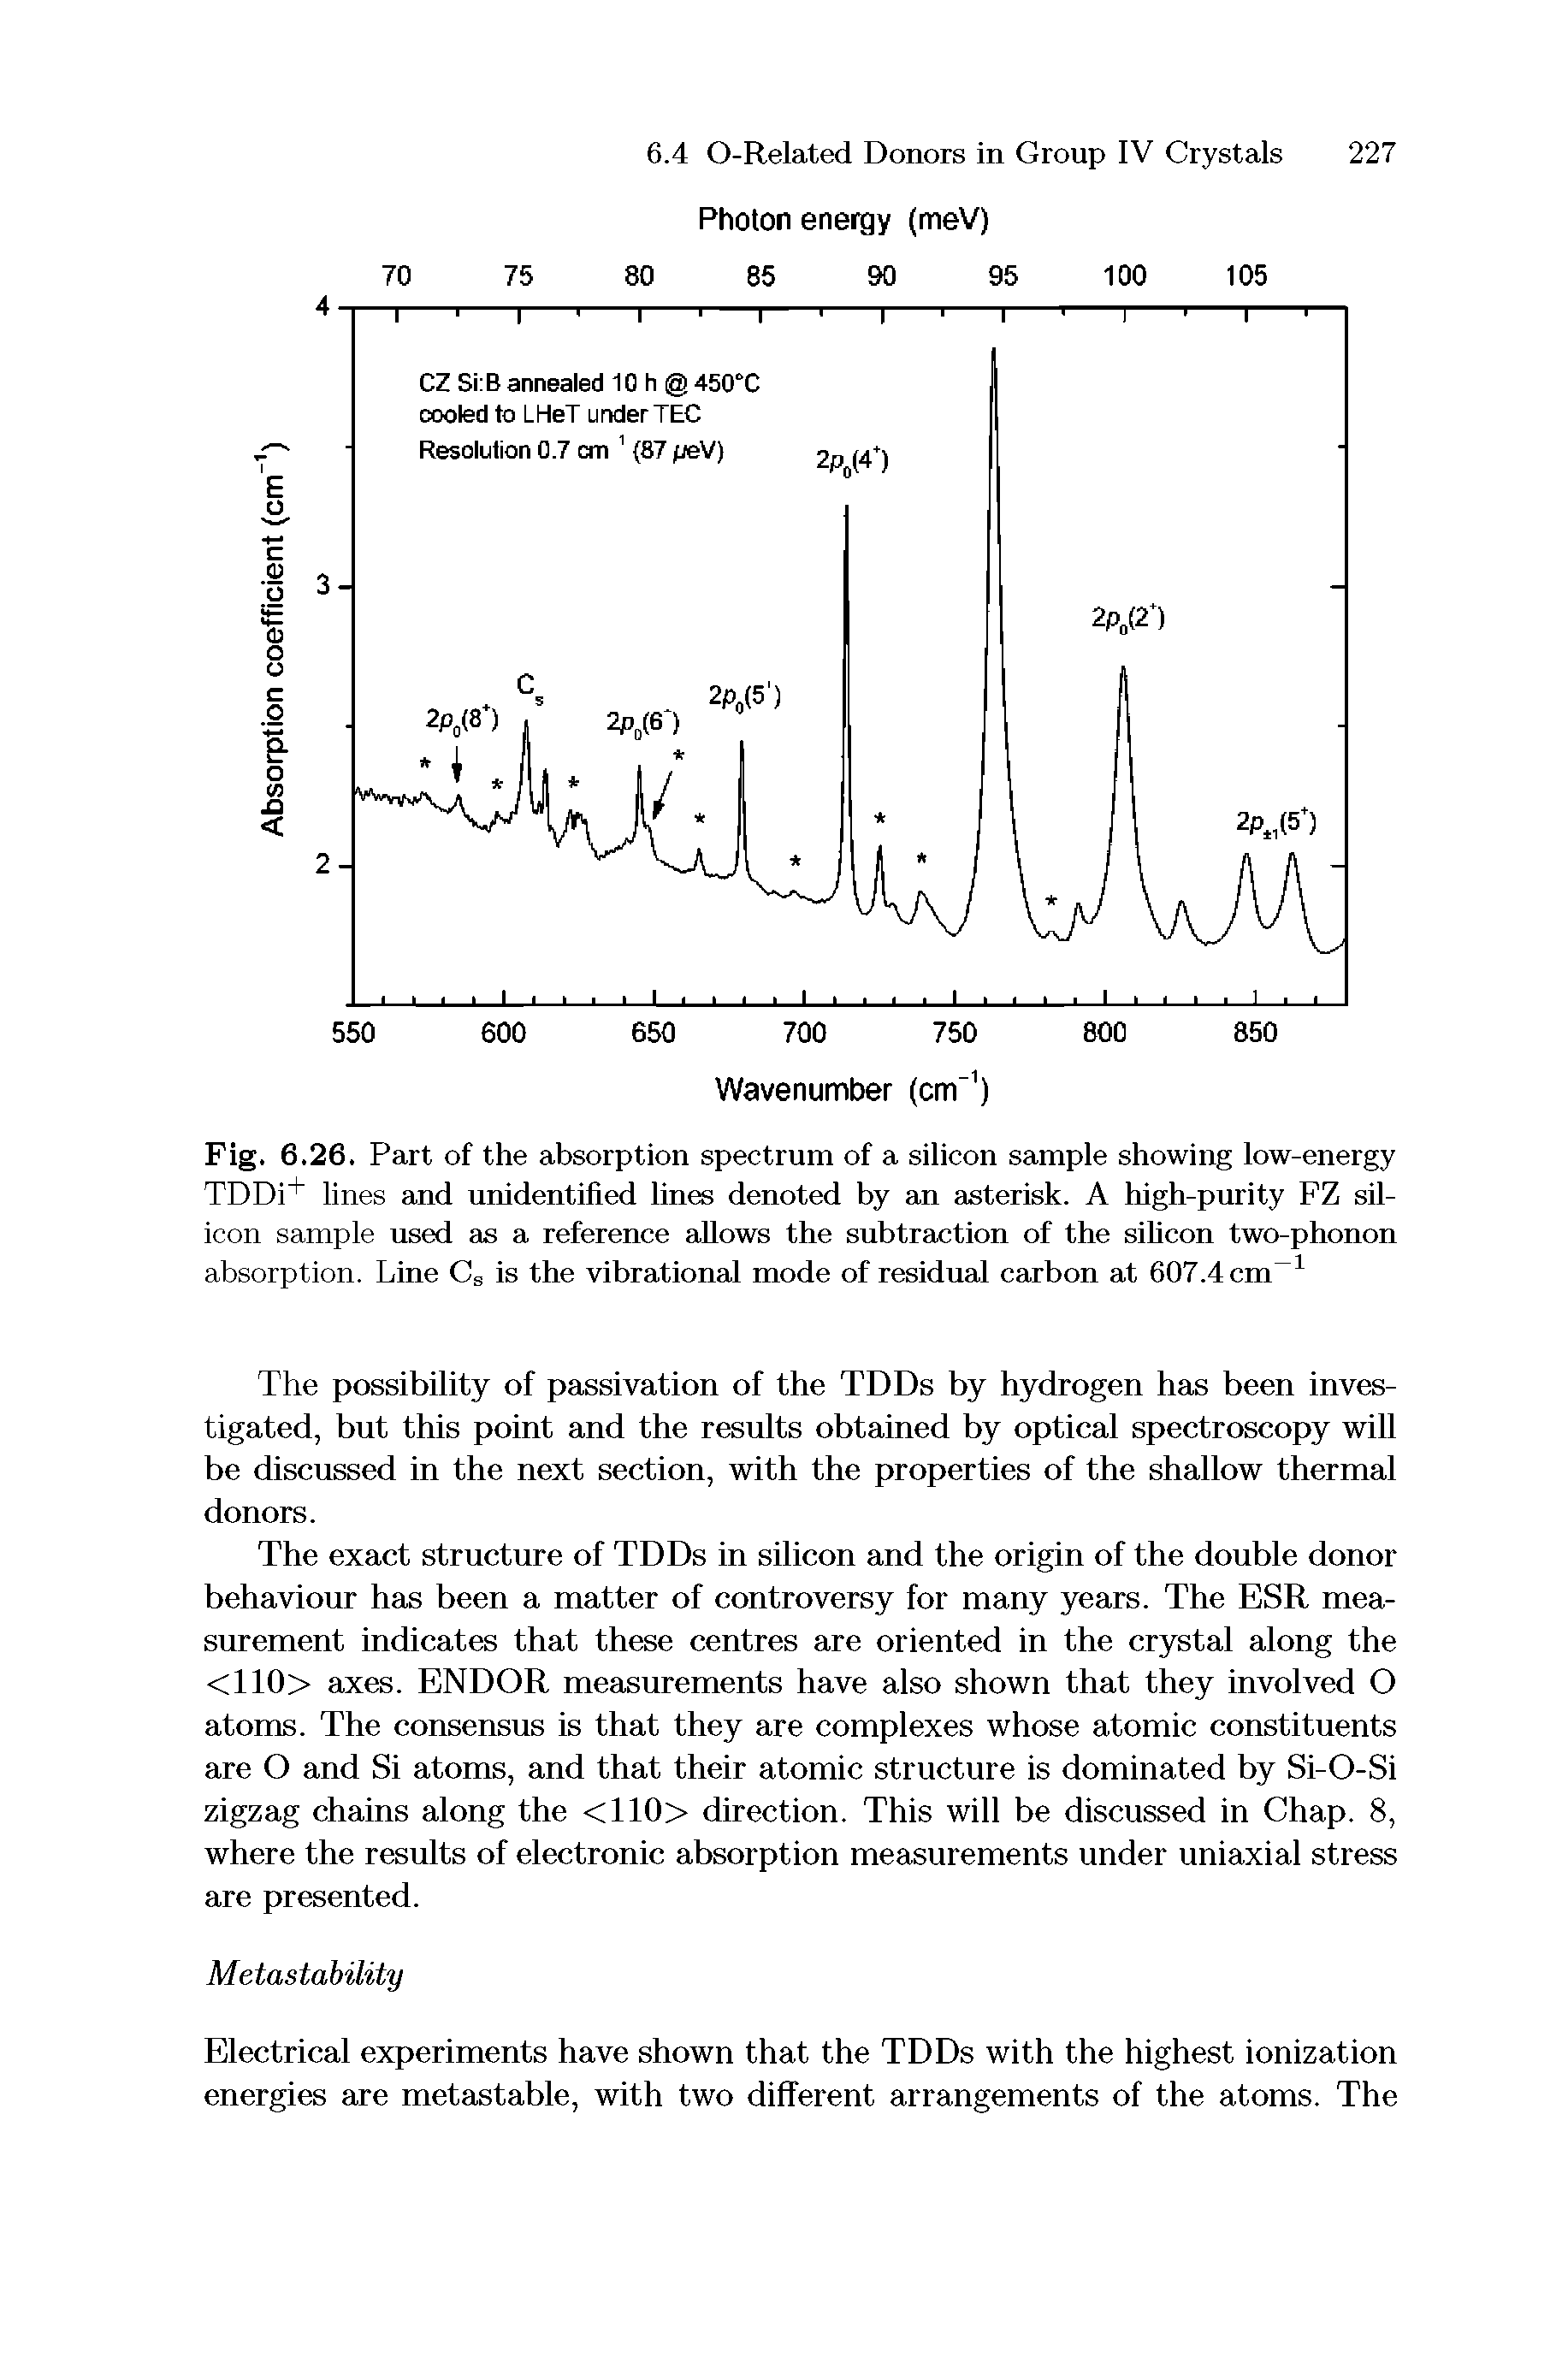 Fig. 6.26. Part of the absorption spectrum of a silicon sample showing low-energy TDDi+ lines and unidentified lines denoted by an asterisk. A high-purity FZ silicon sample used as a reference allows the subtraction of the silicon two-phonon absorption. Line Cs is the vibrational mode of residual carbon at 607.4 cm 1...